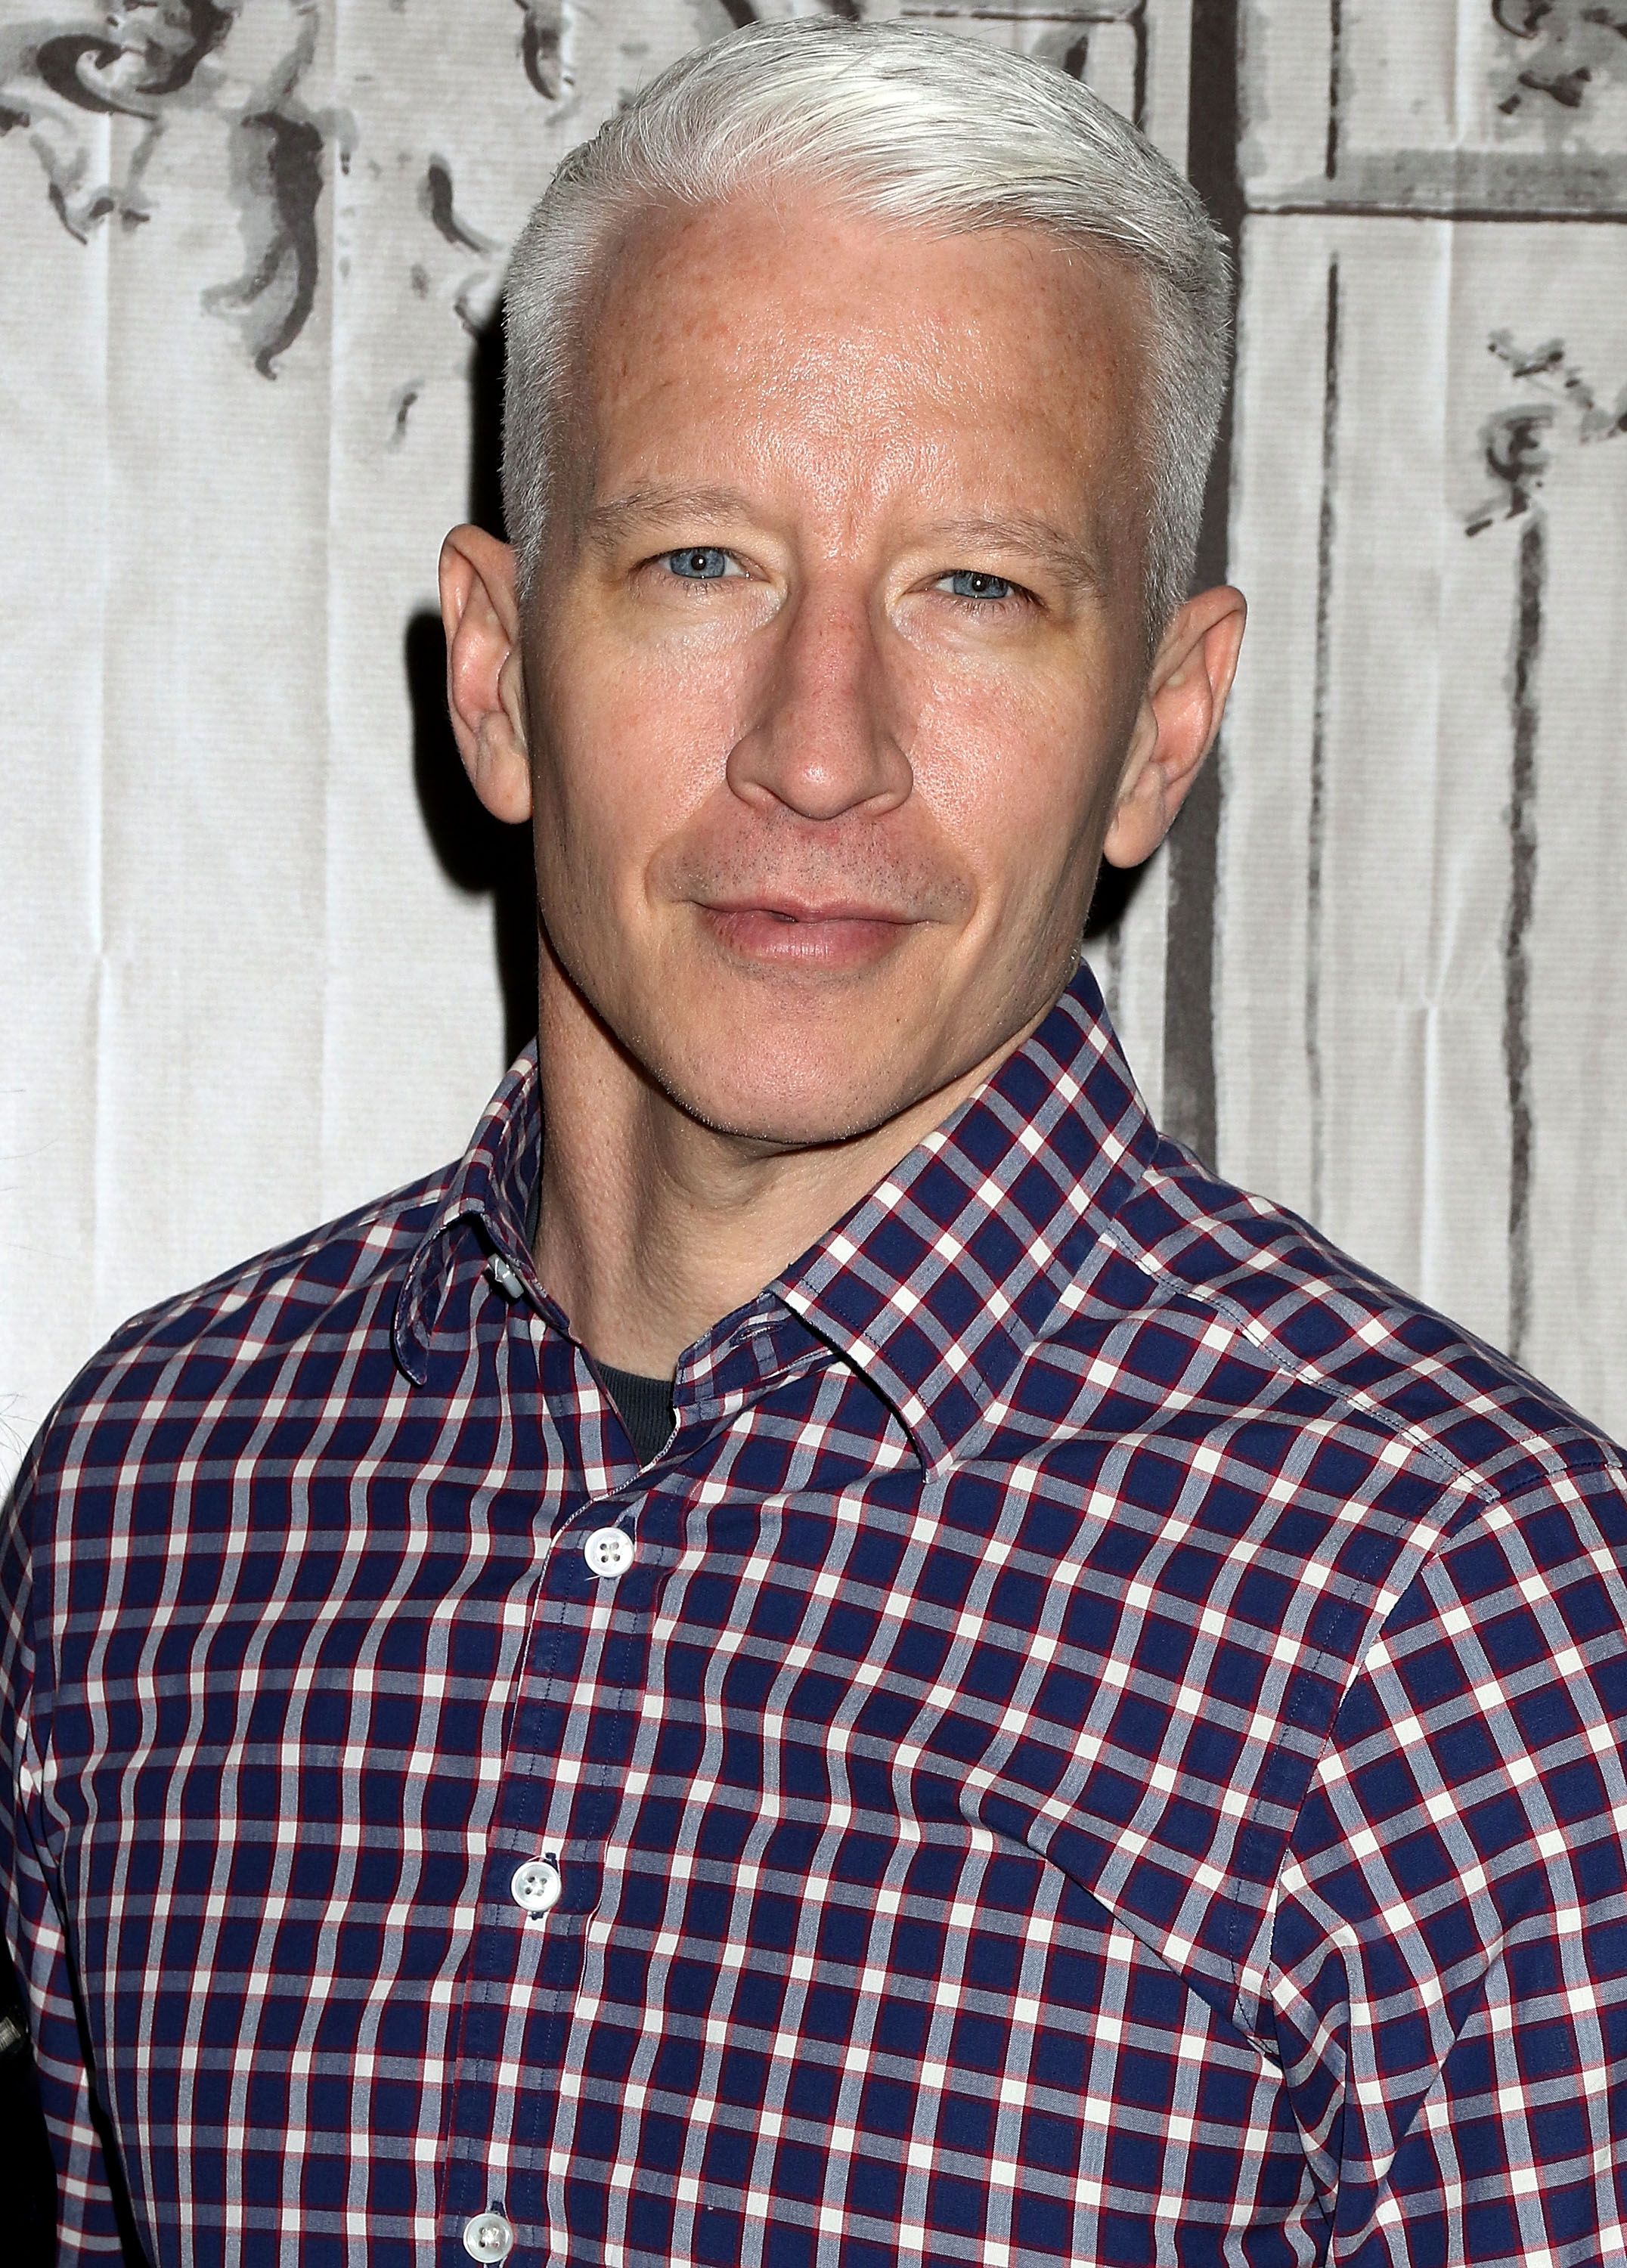 Anderson Cooper at the AOL Build Speaker Series to discuss "Nothing Left Unsaid" in New York on April 15, 2016. | Source: Laura Cavanaugh/Getty Images